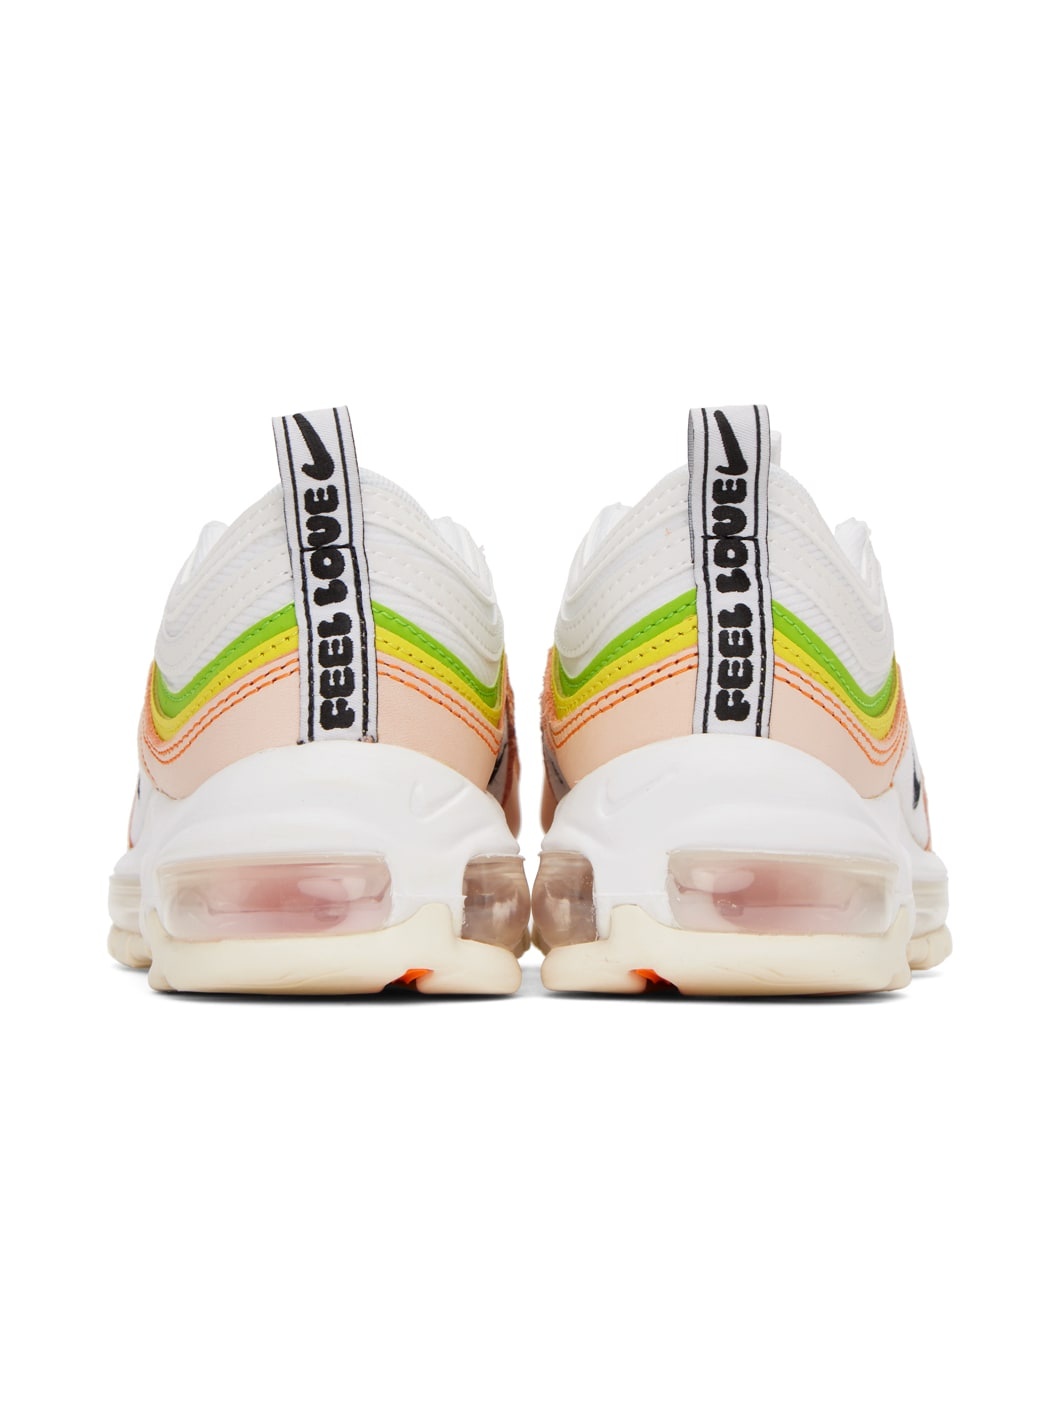 White & Pink Air Max 97 Sneakers - 2